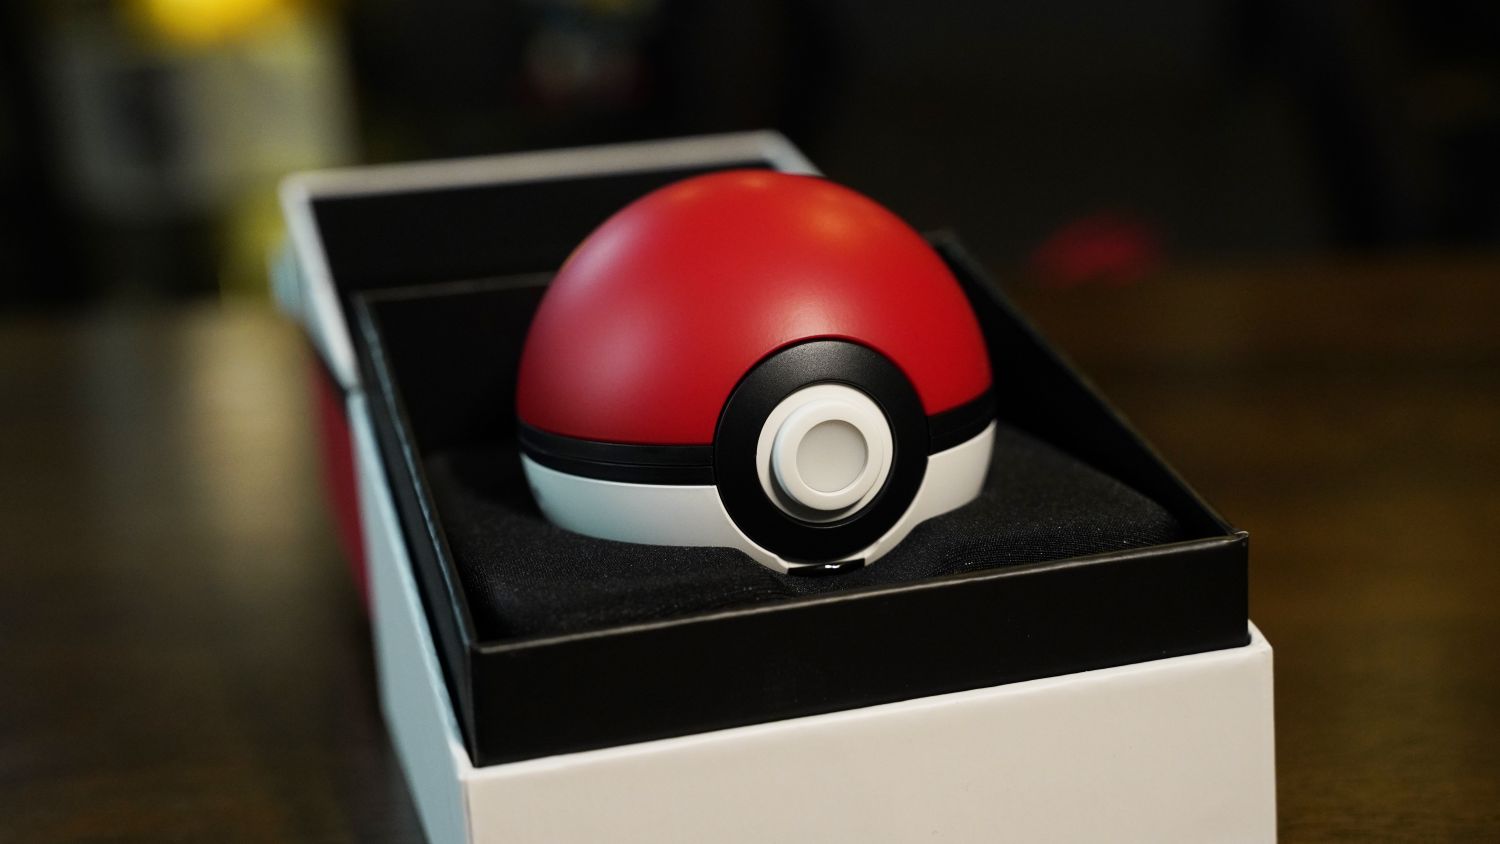 Unboxing The Razer X Pokemon Pikachu Limited Edition Collection Geek Culture